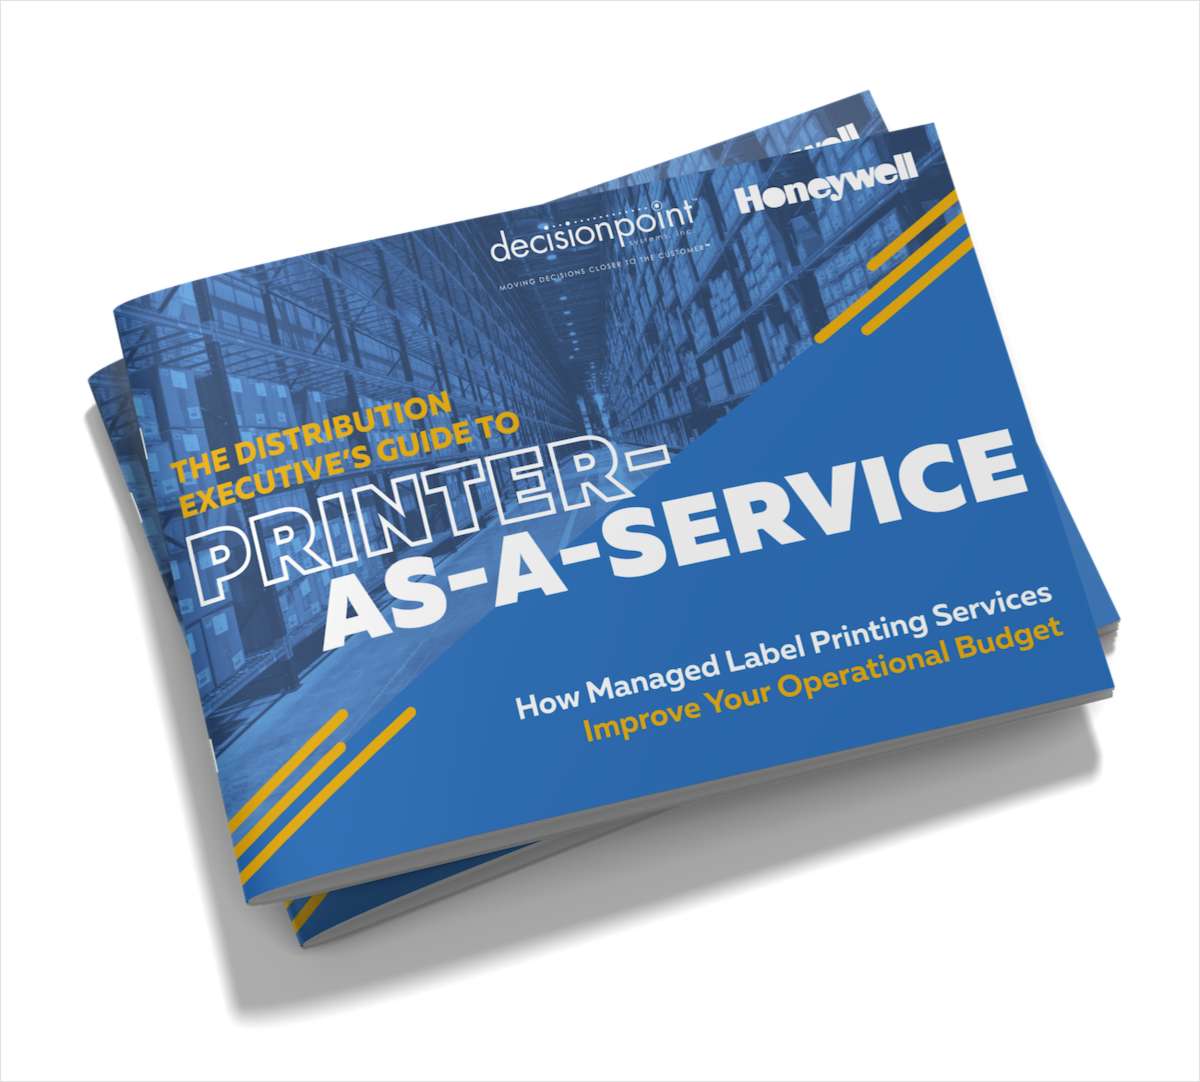 The Distribution Executive's Guide to Printer-as-a-Service